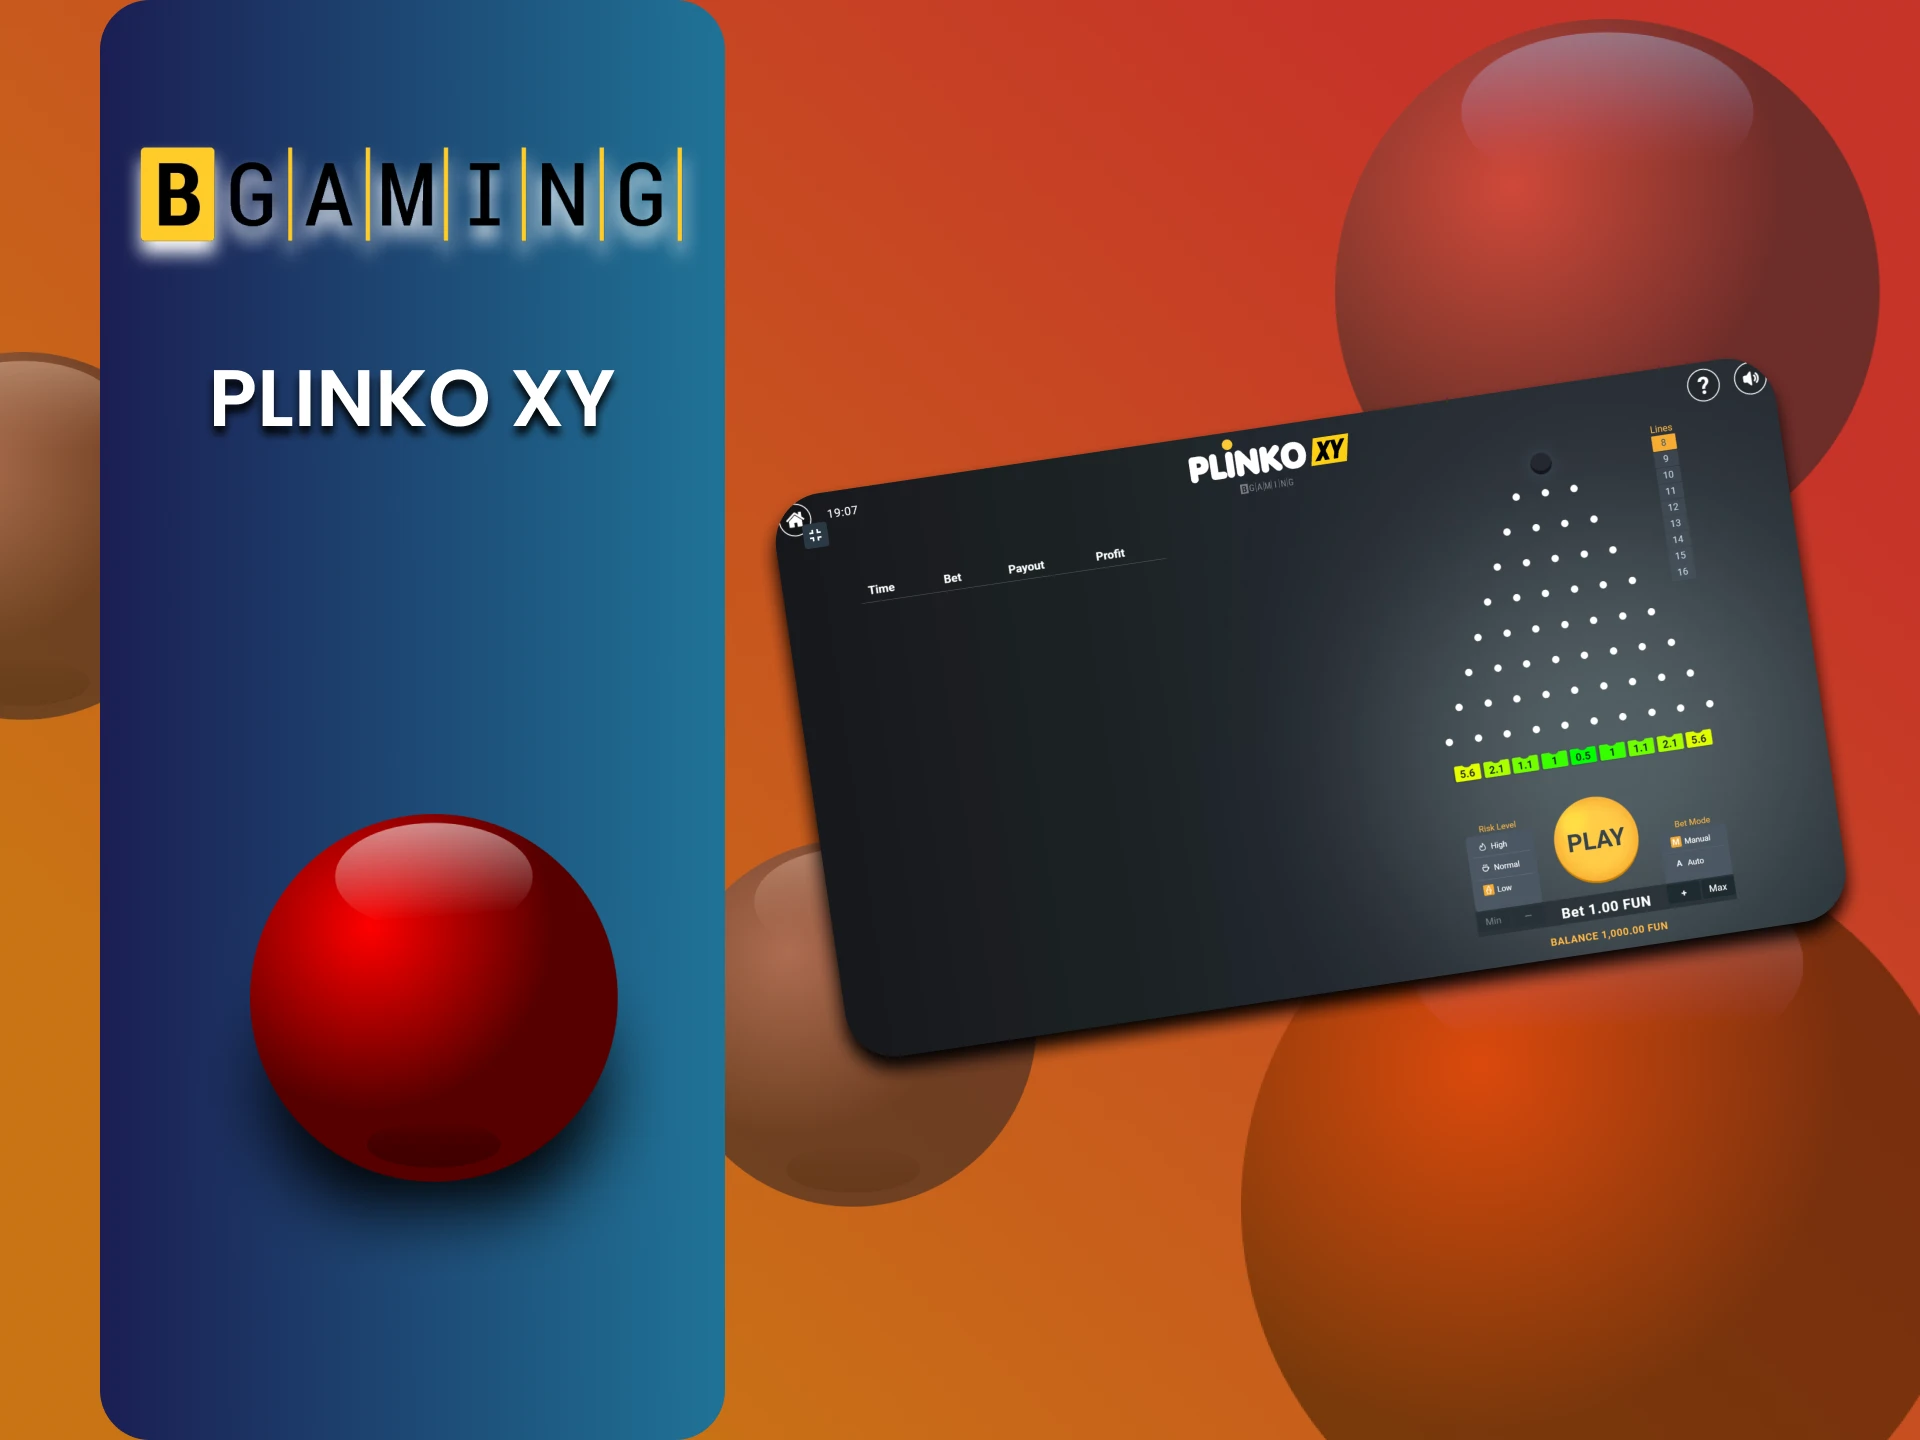 Try your hand at Plinko XY from BGaming.